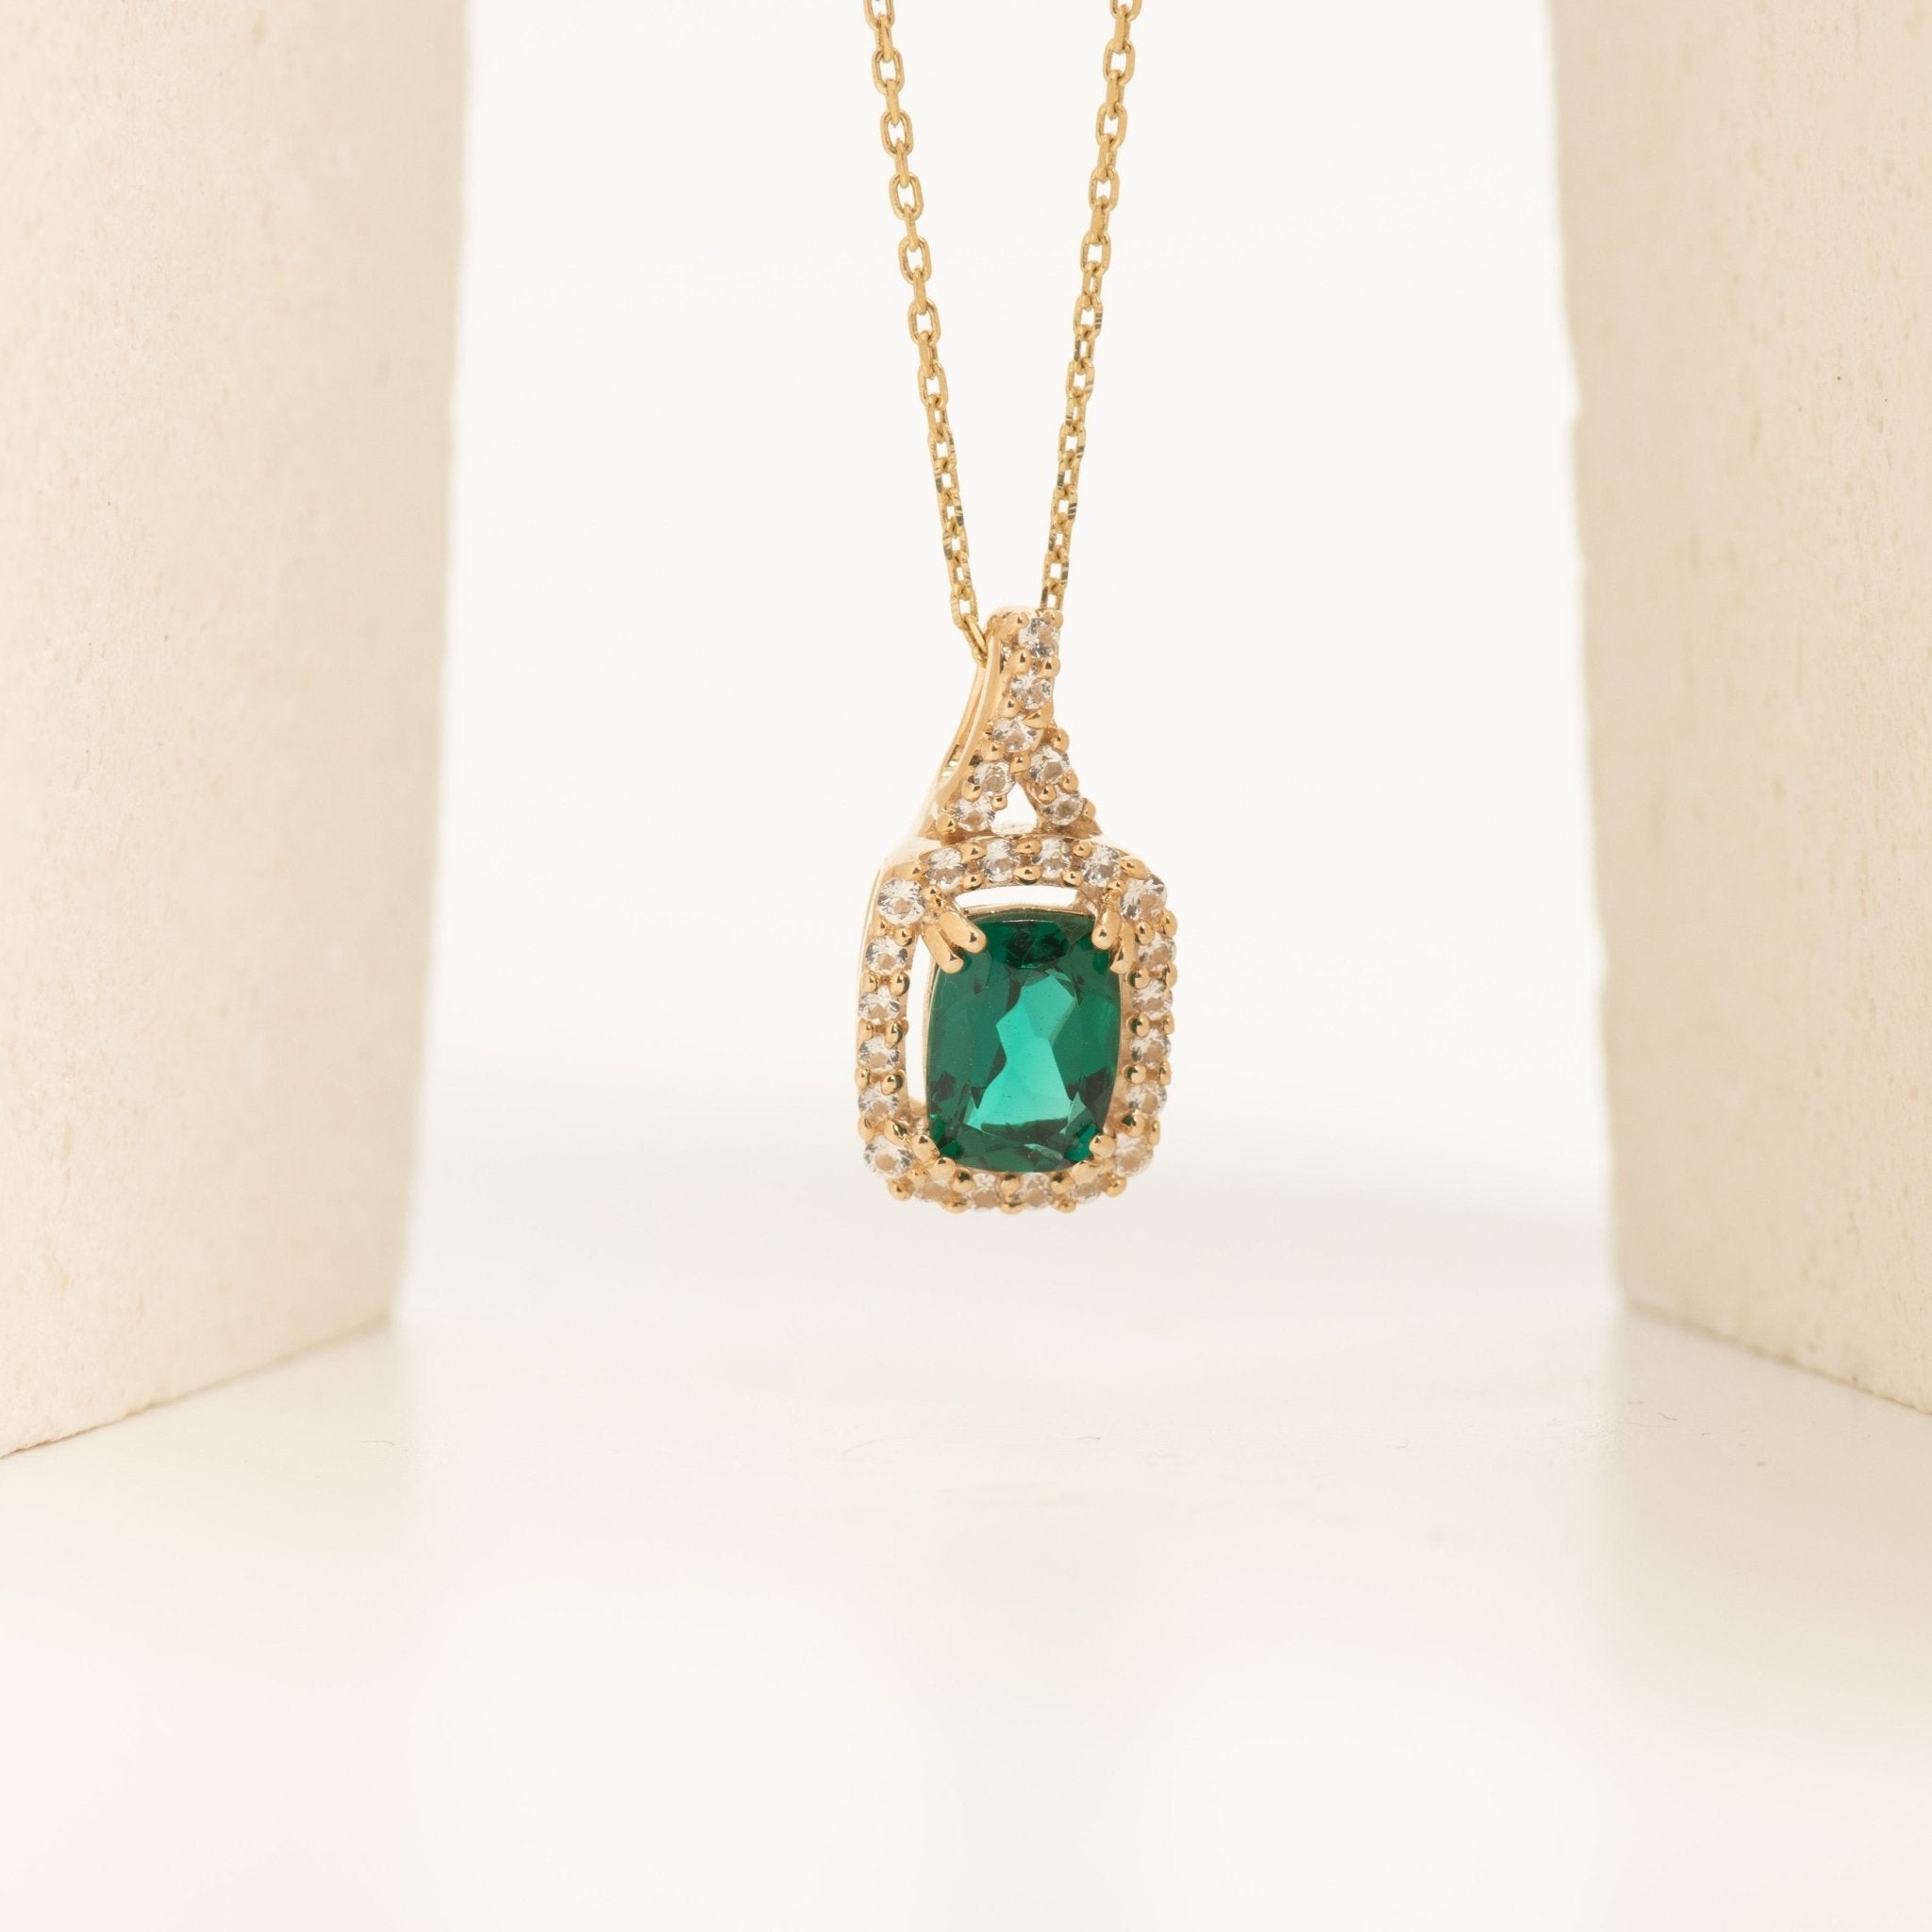 Cushion Cut Emerald Pendant with White Sapphire Halo and Bail Necklaces Estella Collection #product_description# 32729 10k Birthstone Birthstone Jewelry #tag4# #tag5# #tag6# #tag7# #tag8# #tag9# #tag10#